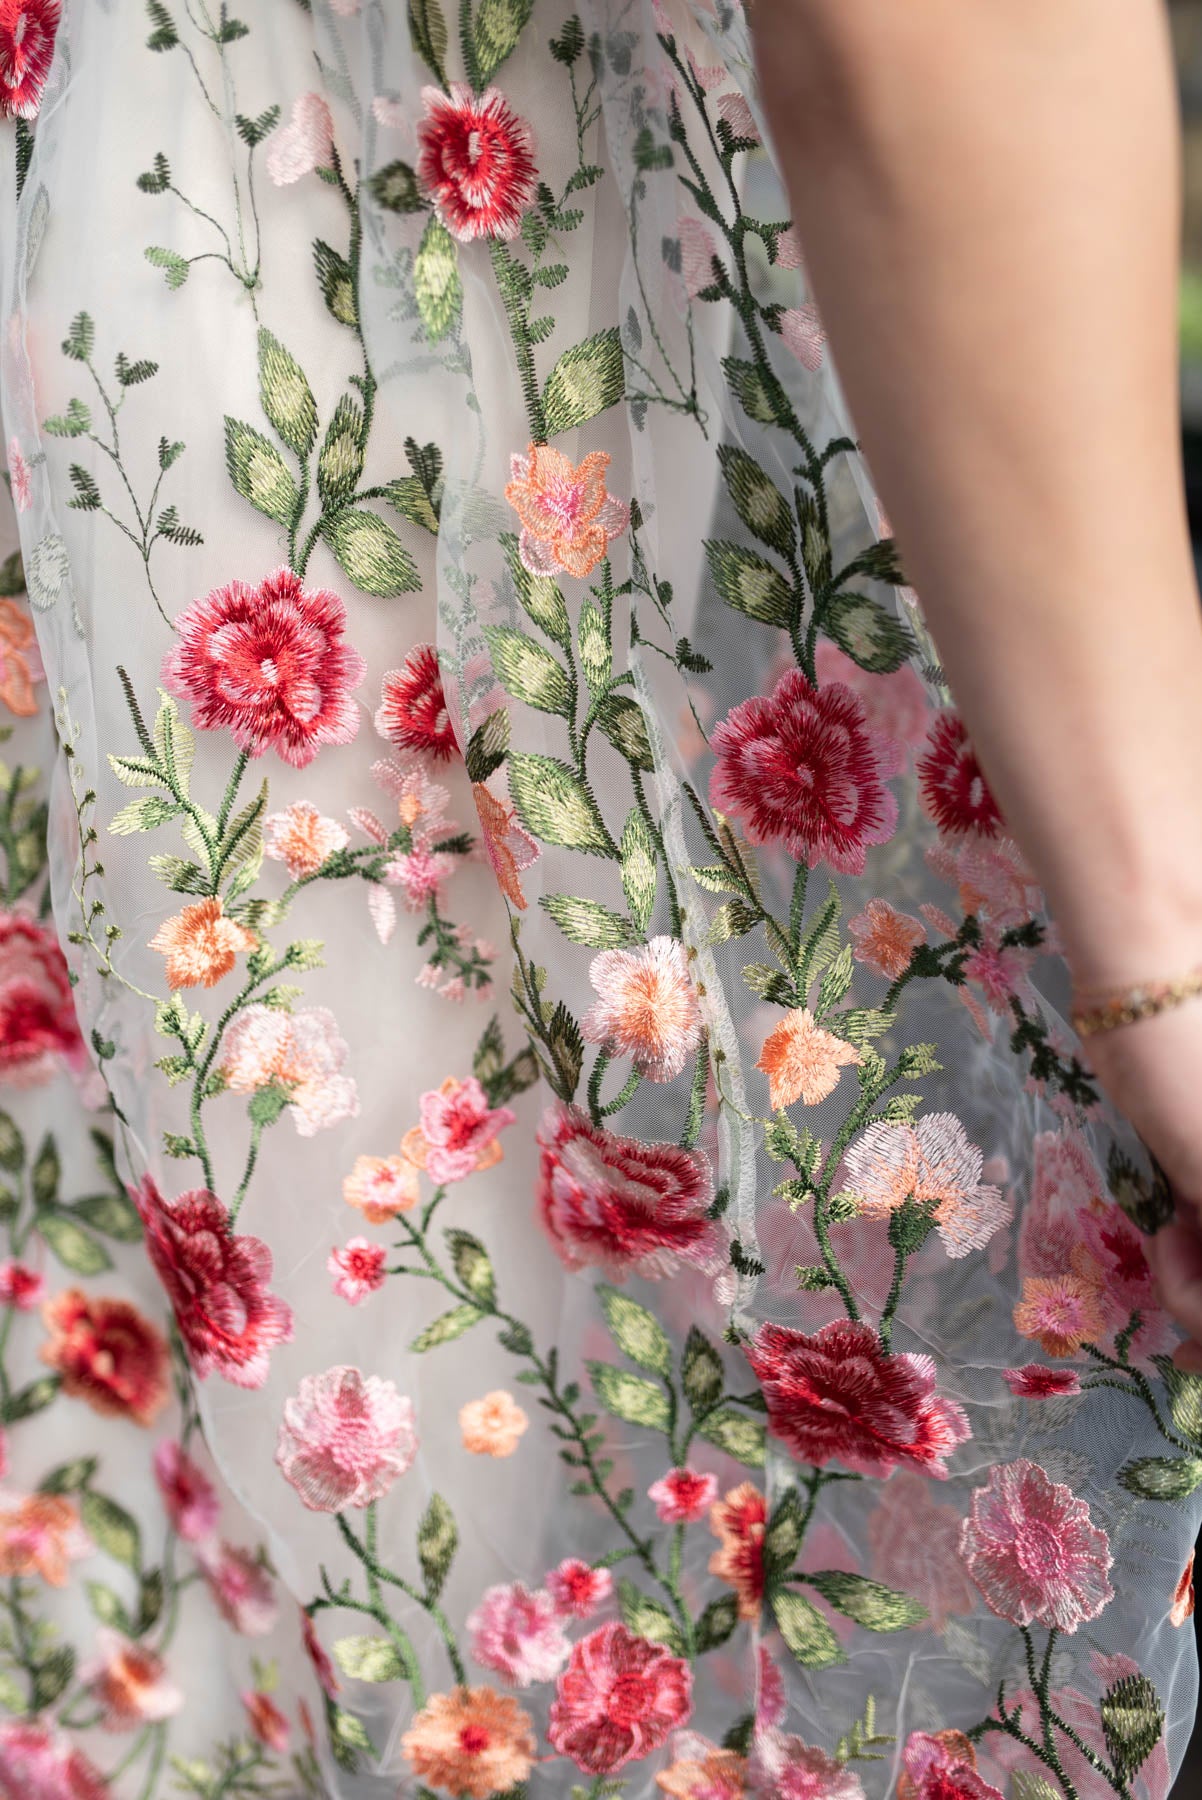 Close up of the floral embroidery on the pink embroidered mesh dress